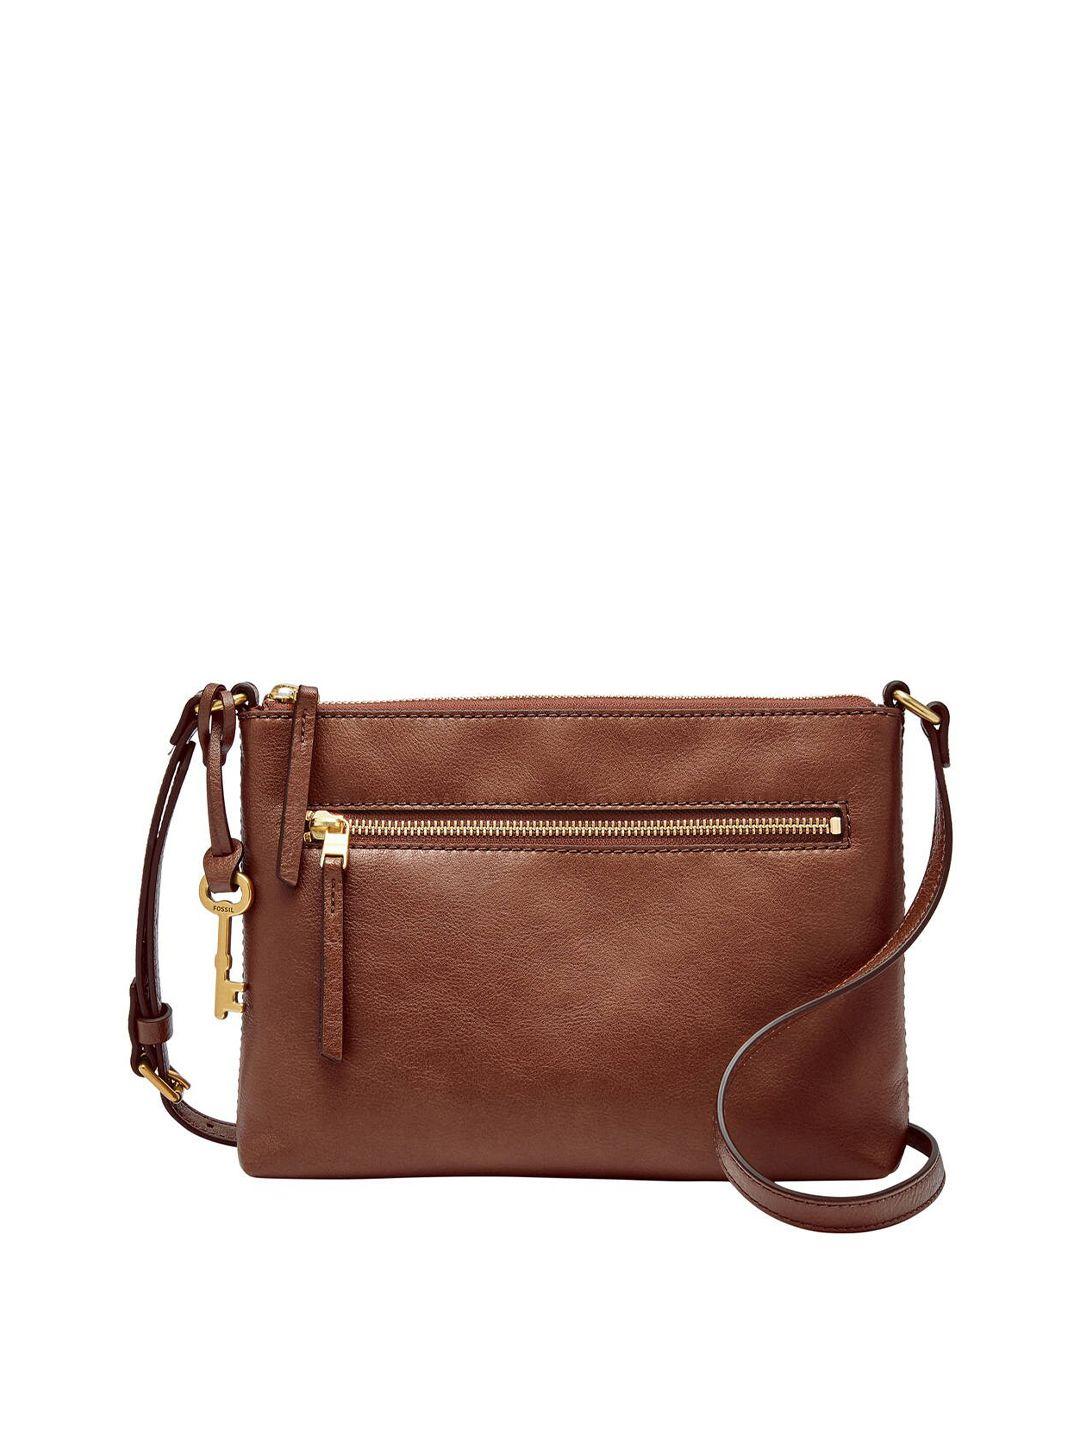 fossil brown solid leather sling bag